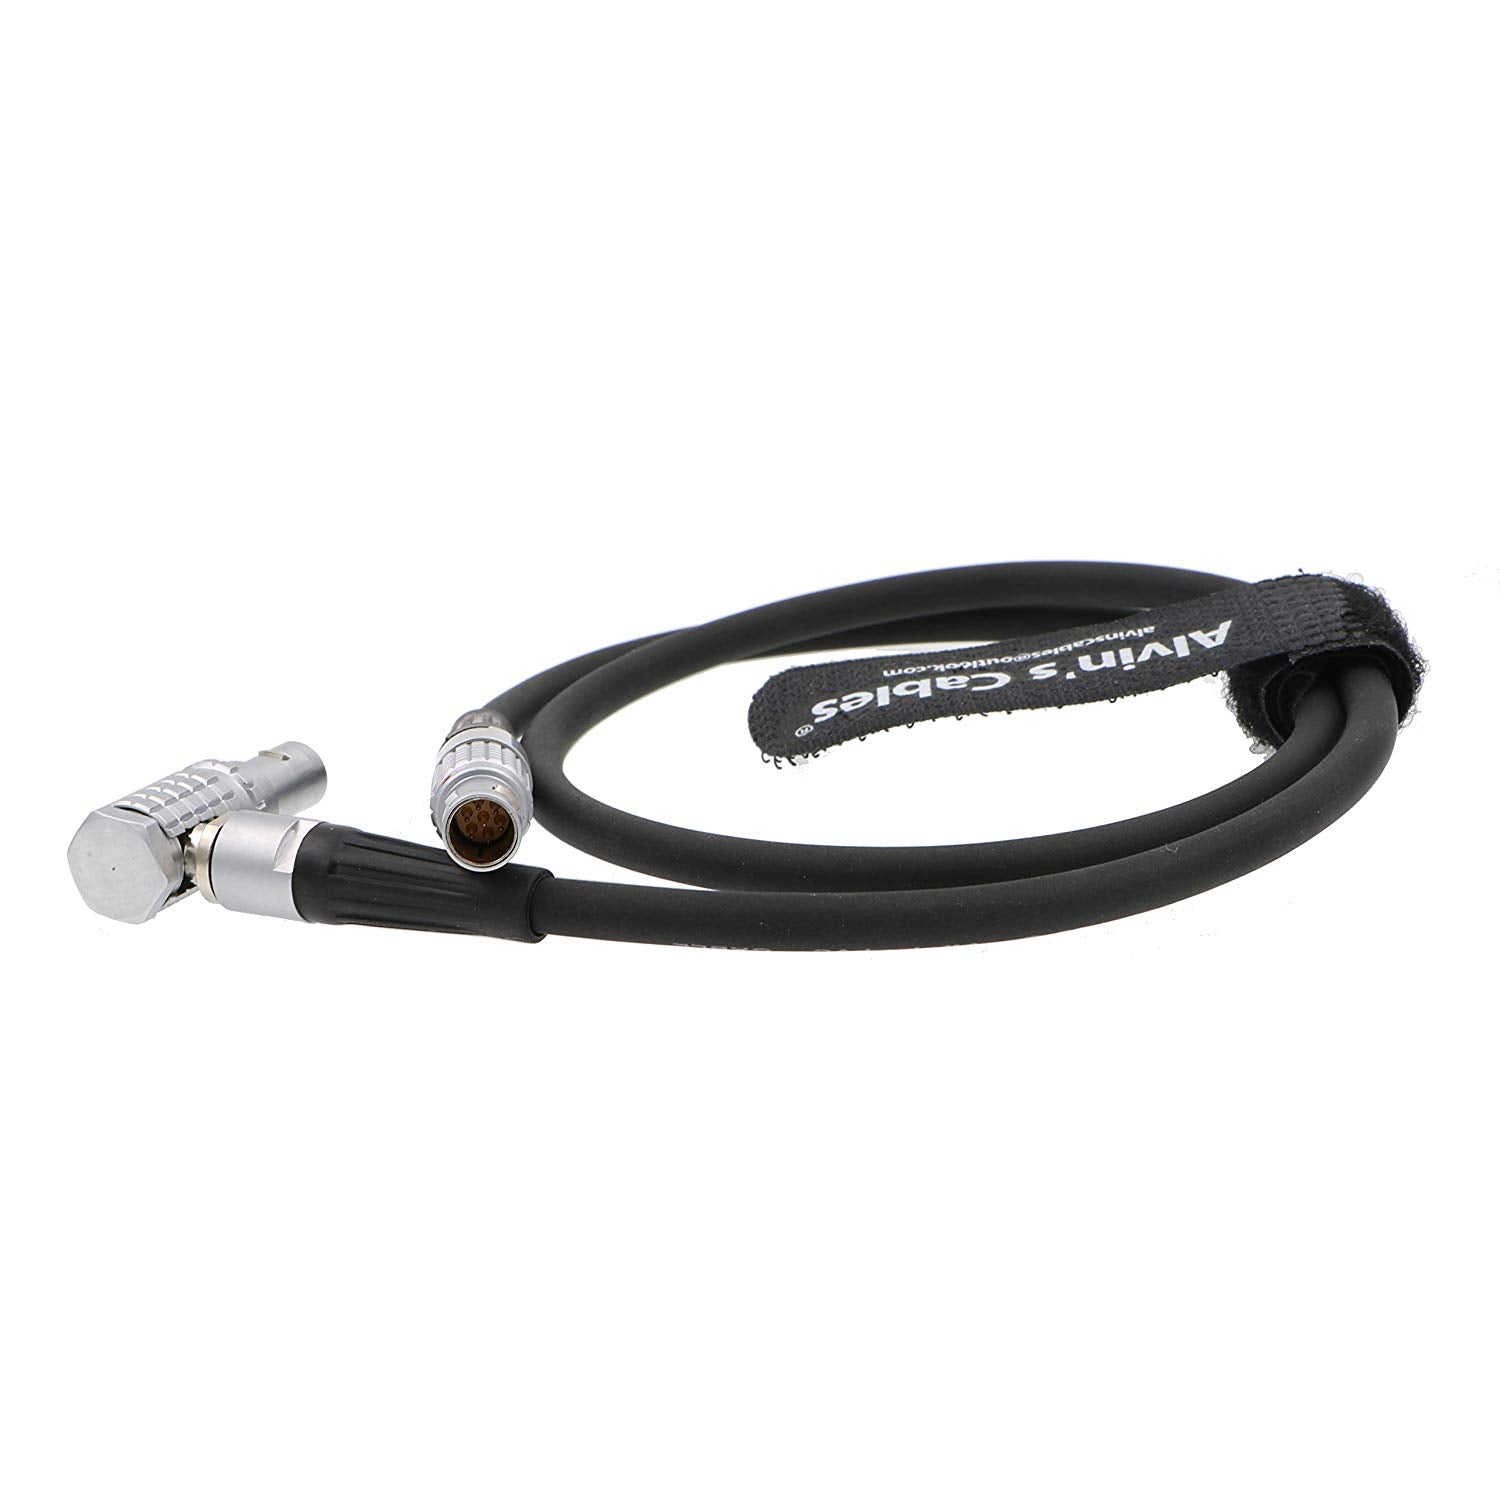 Alvin's Cables Nucleus M 7 Pin to 7 Pin Male Motor Connection Cable Right Angle to Straight 60CM